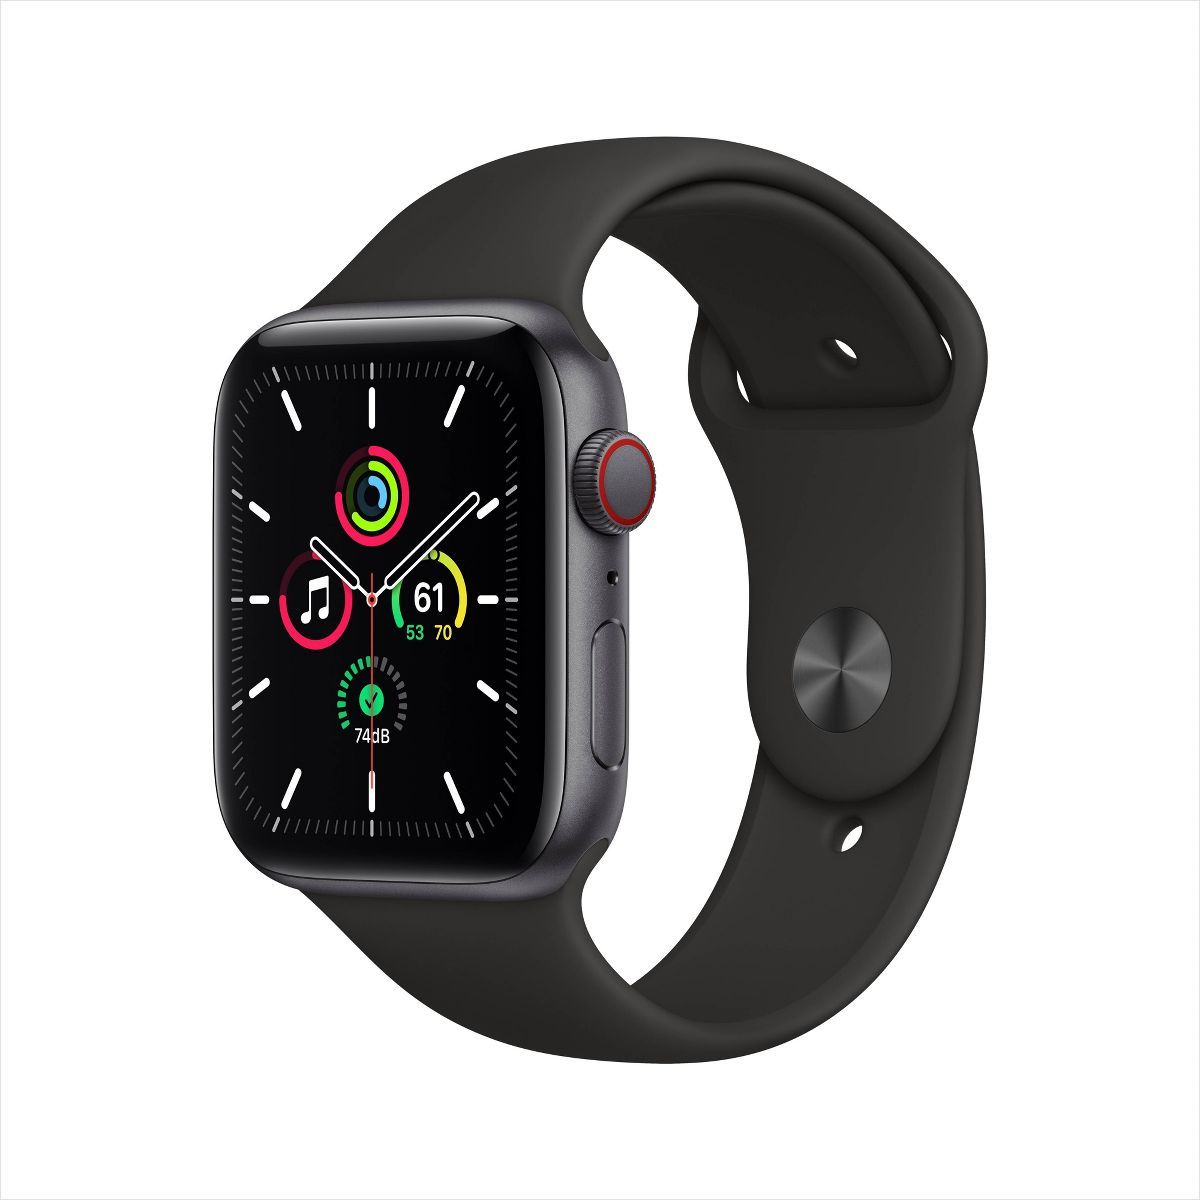 Apple Watch SE (GPS + Cellular) (1st generation) Aluminum Case with Sport Band | Target